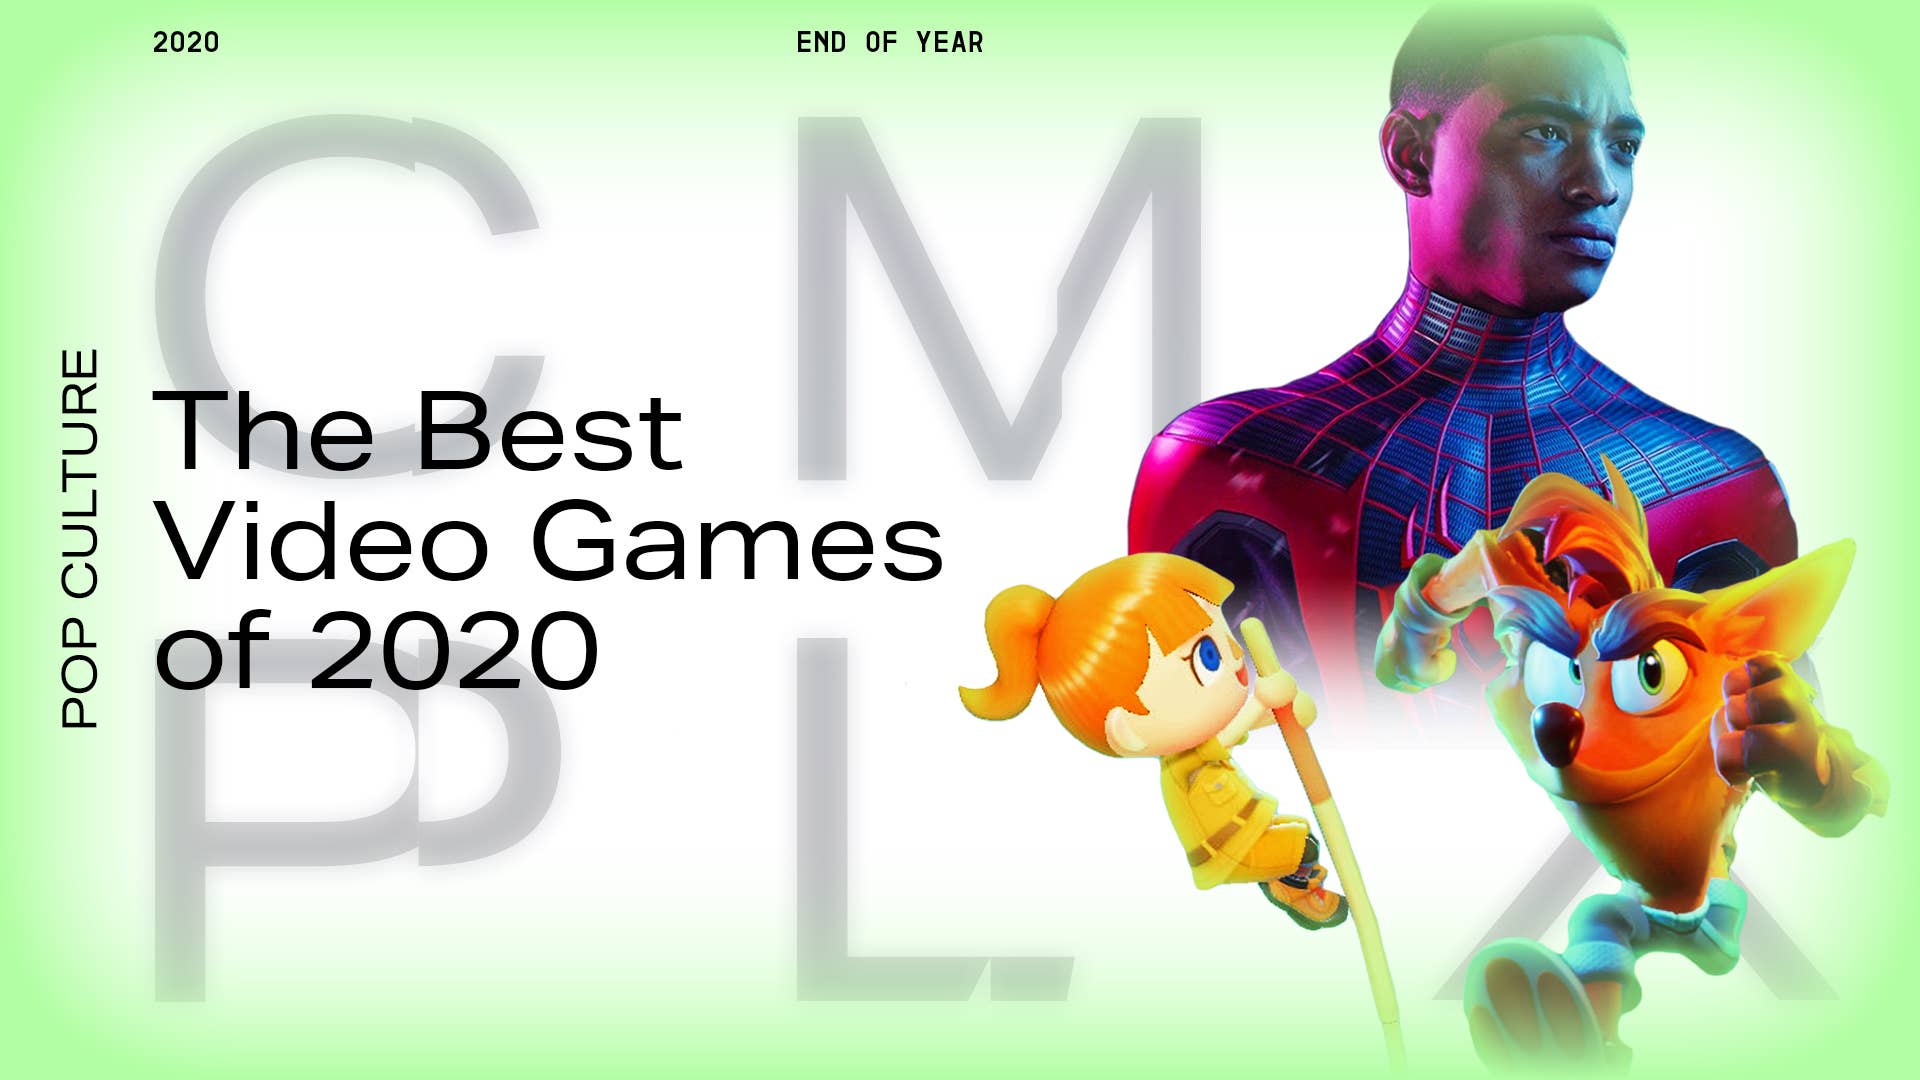 The Best Video Games of 2020